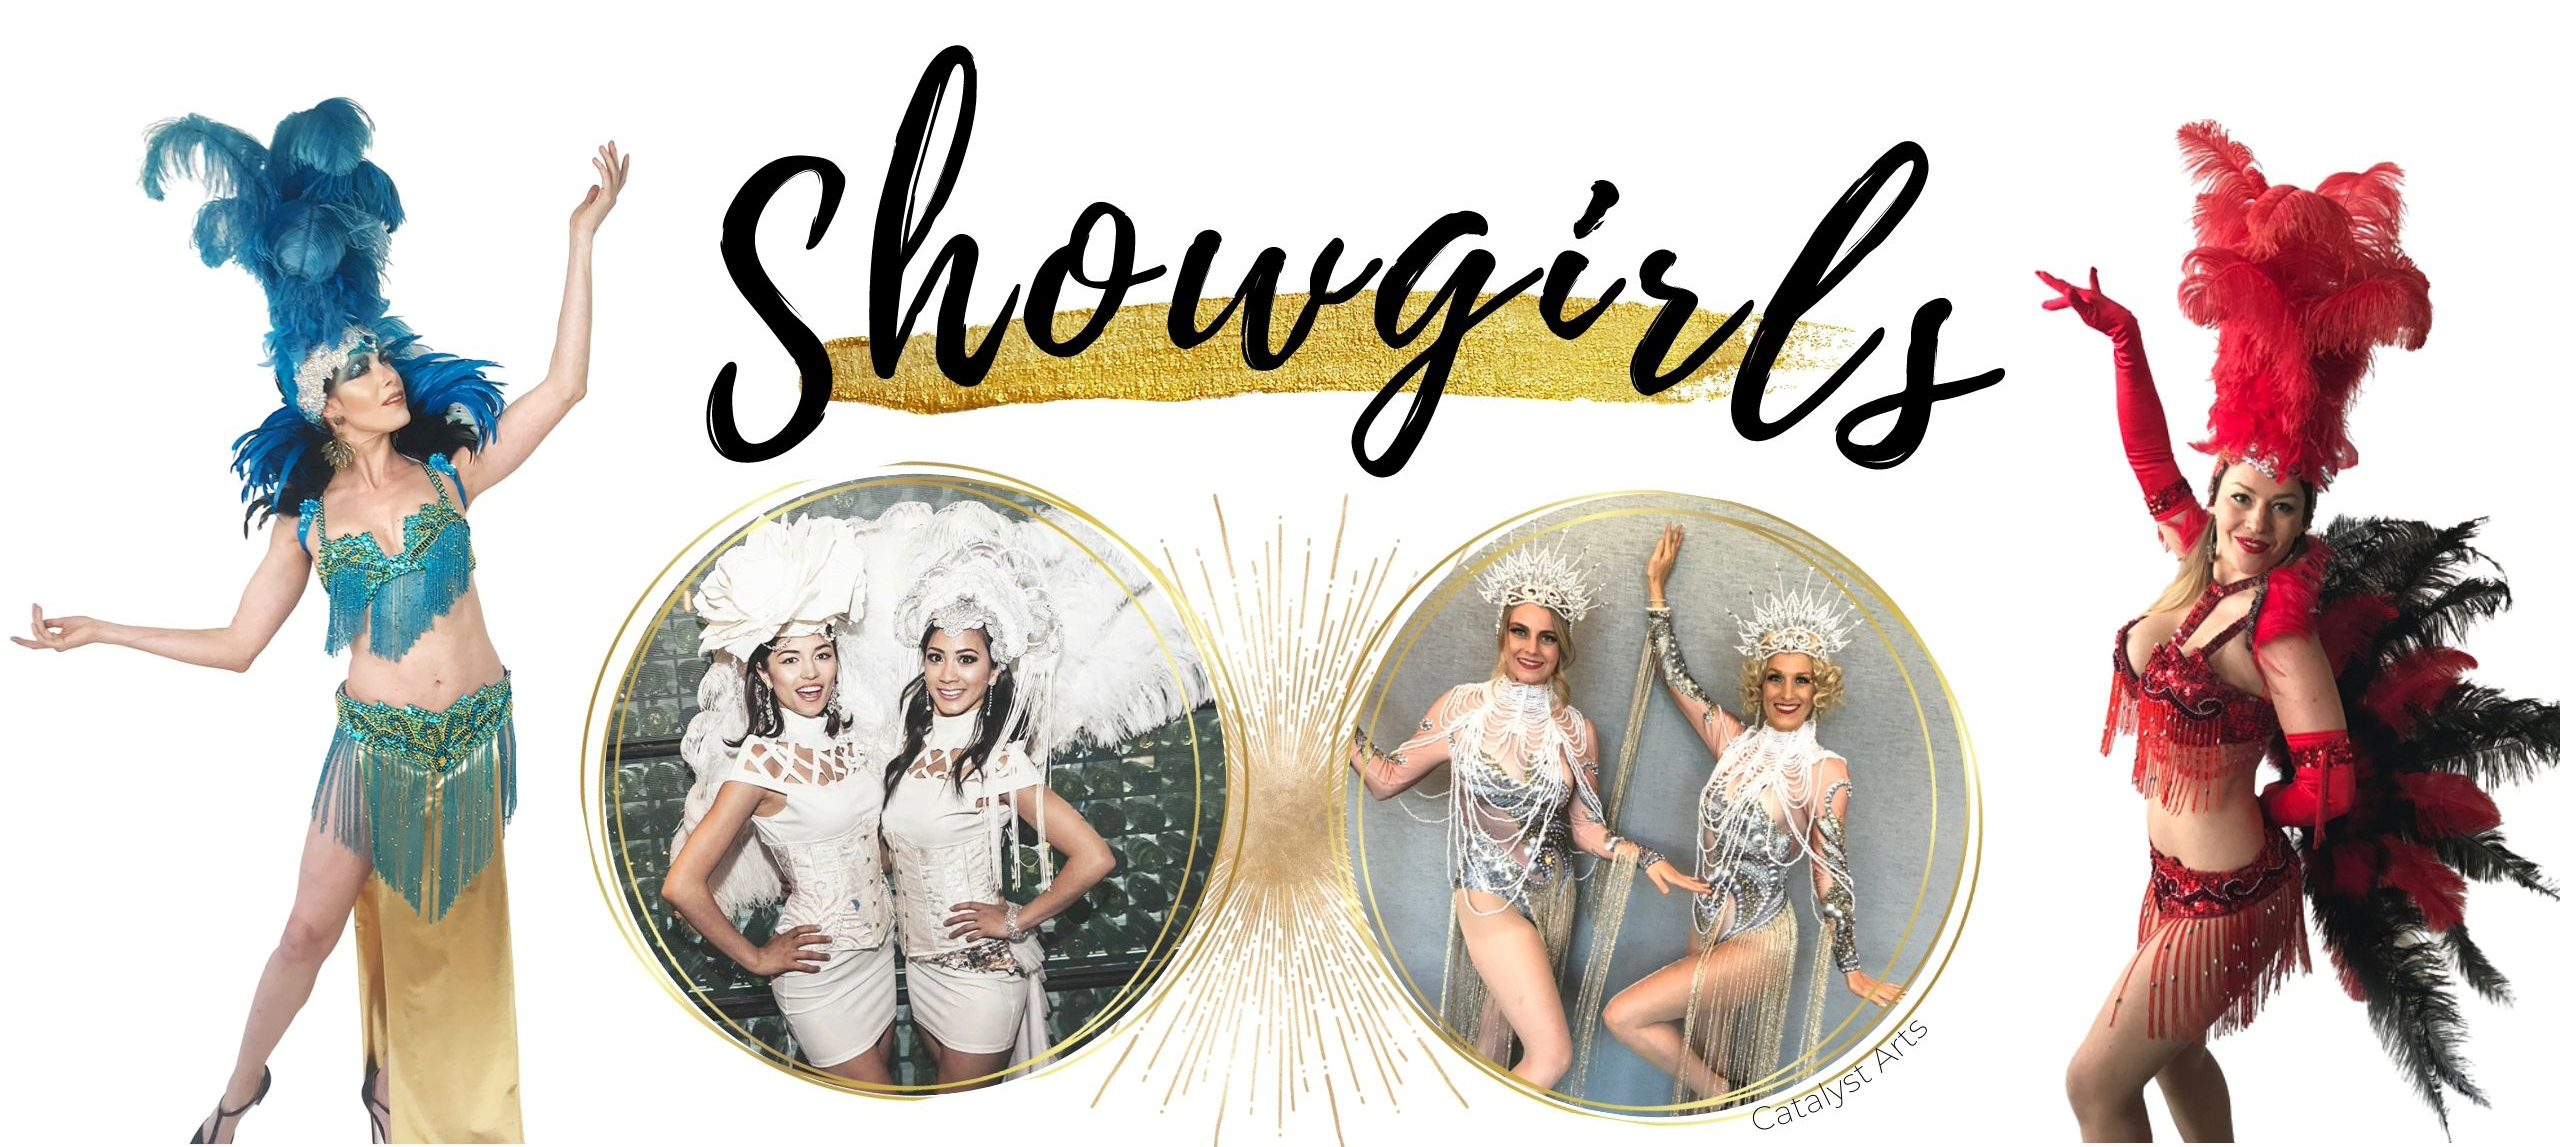 Showgirl greeters & performers for events by Catalyst Arts